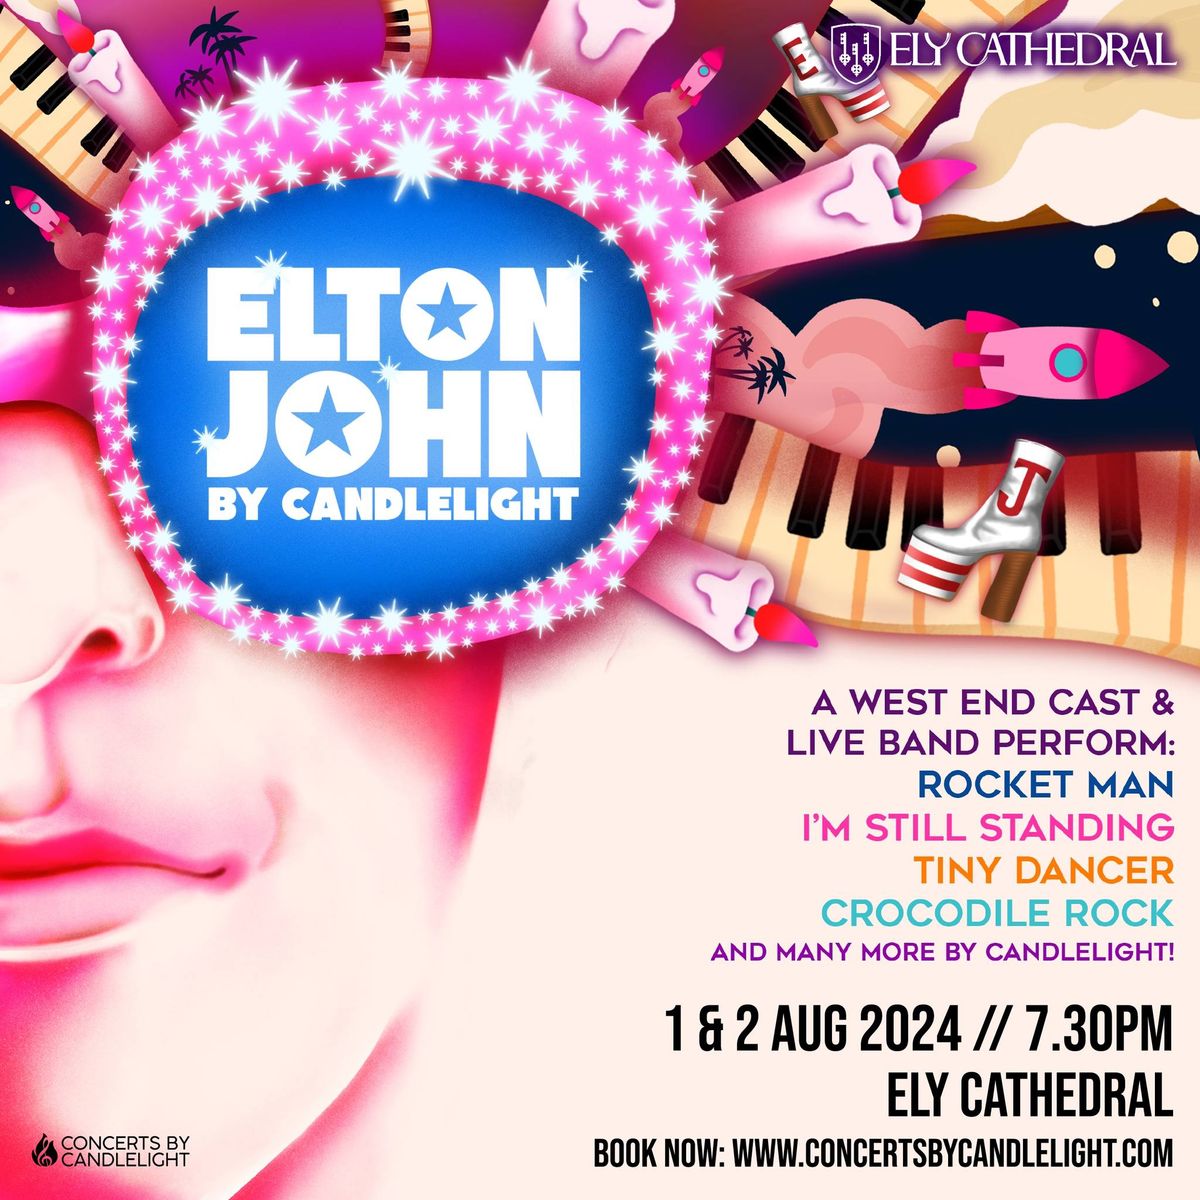 Elton John By Candlelight At Ely Cathedral